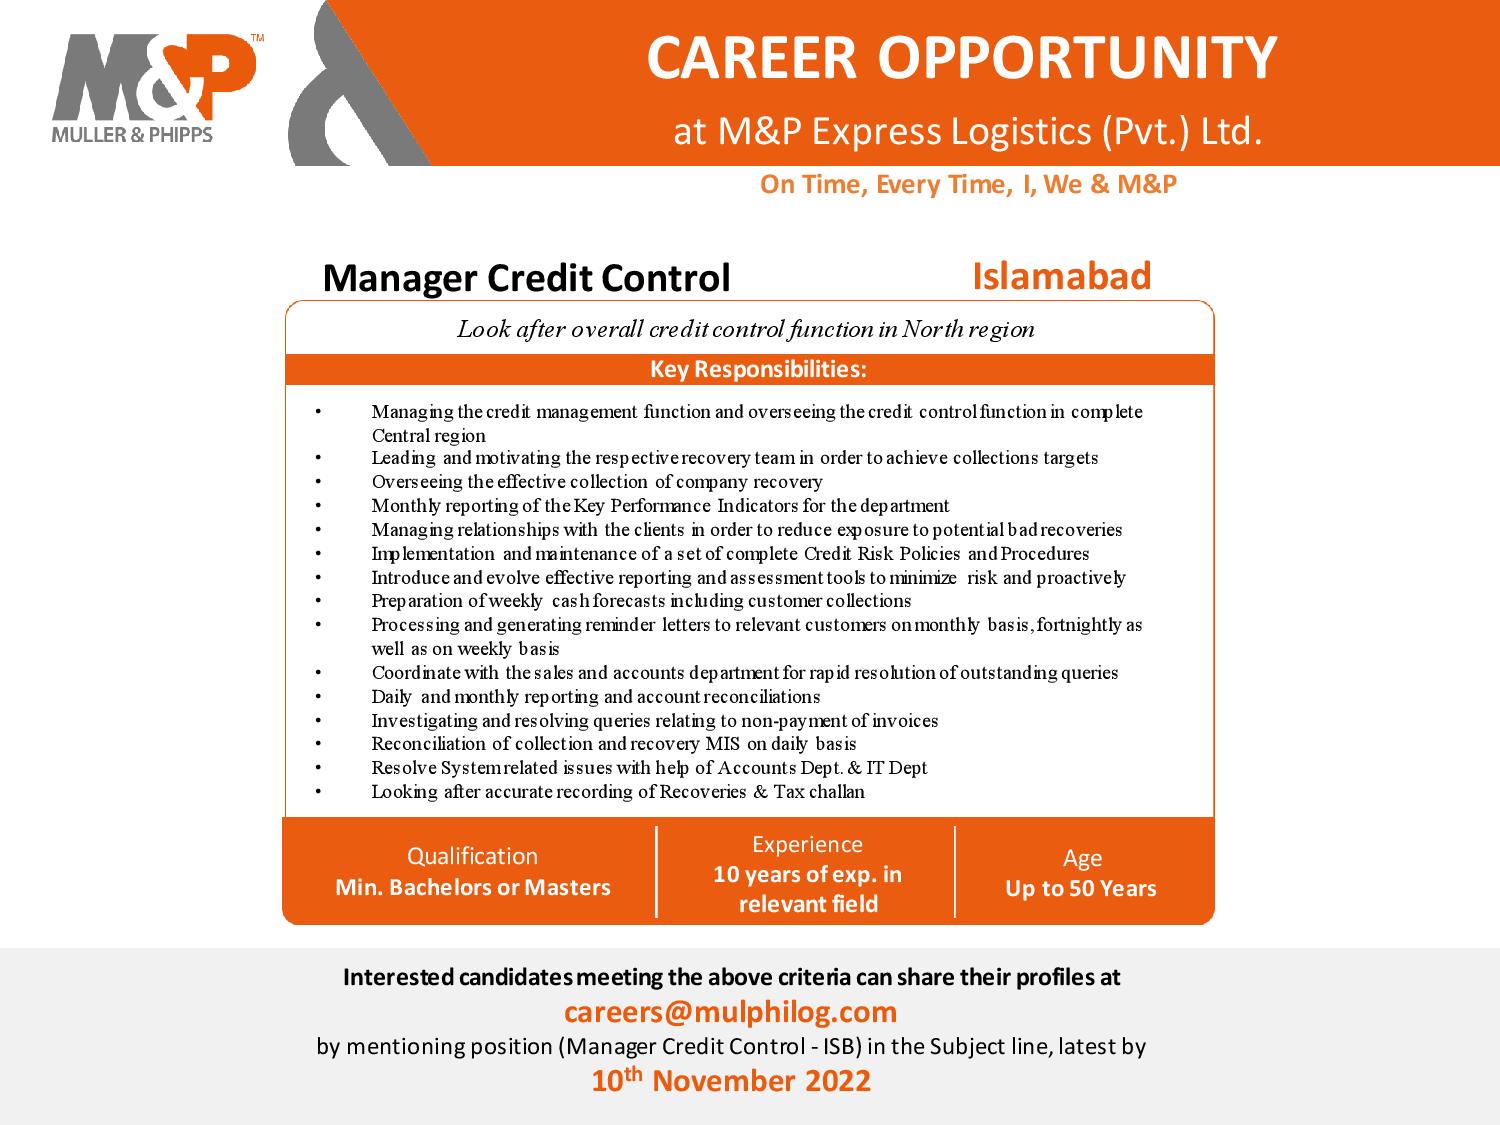 Manager Credit Control opportunity at M&P Express Logistics